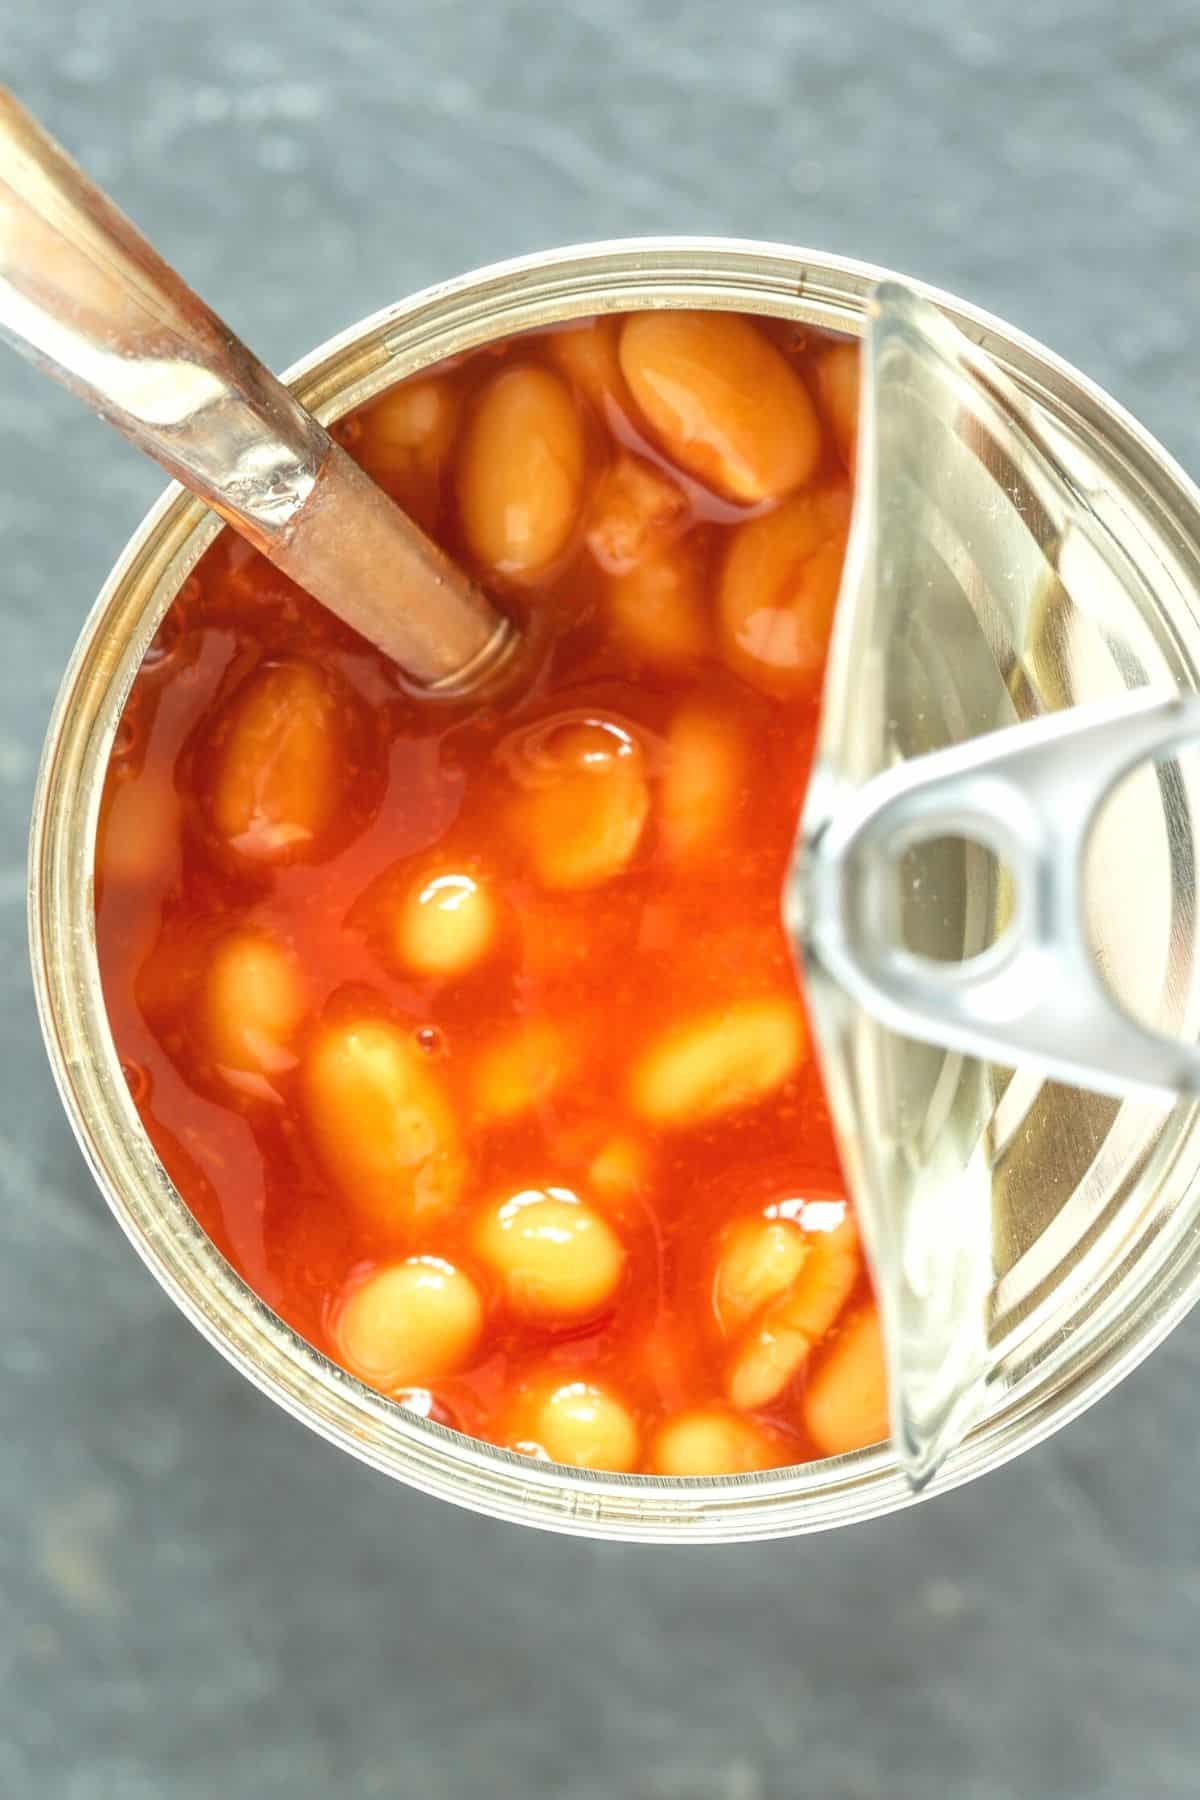 an open can of baked beans.